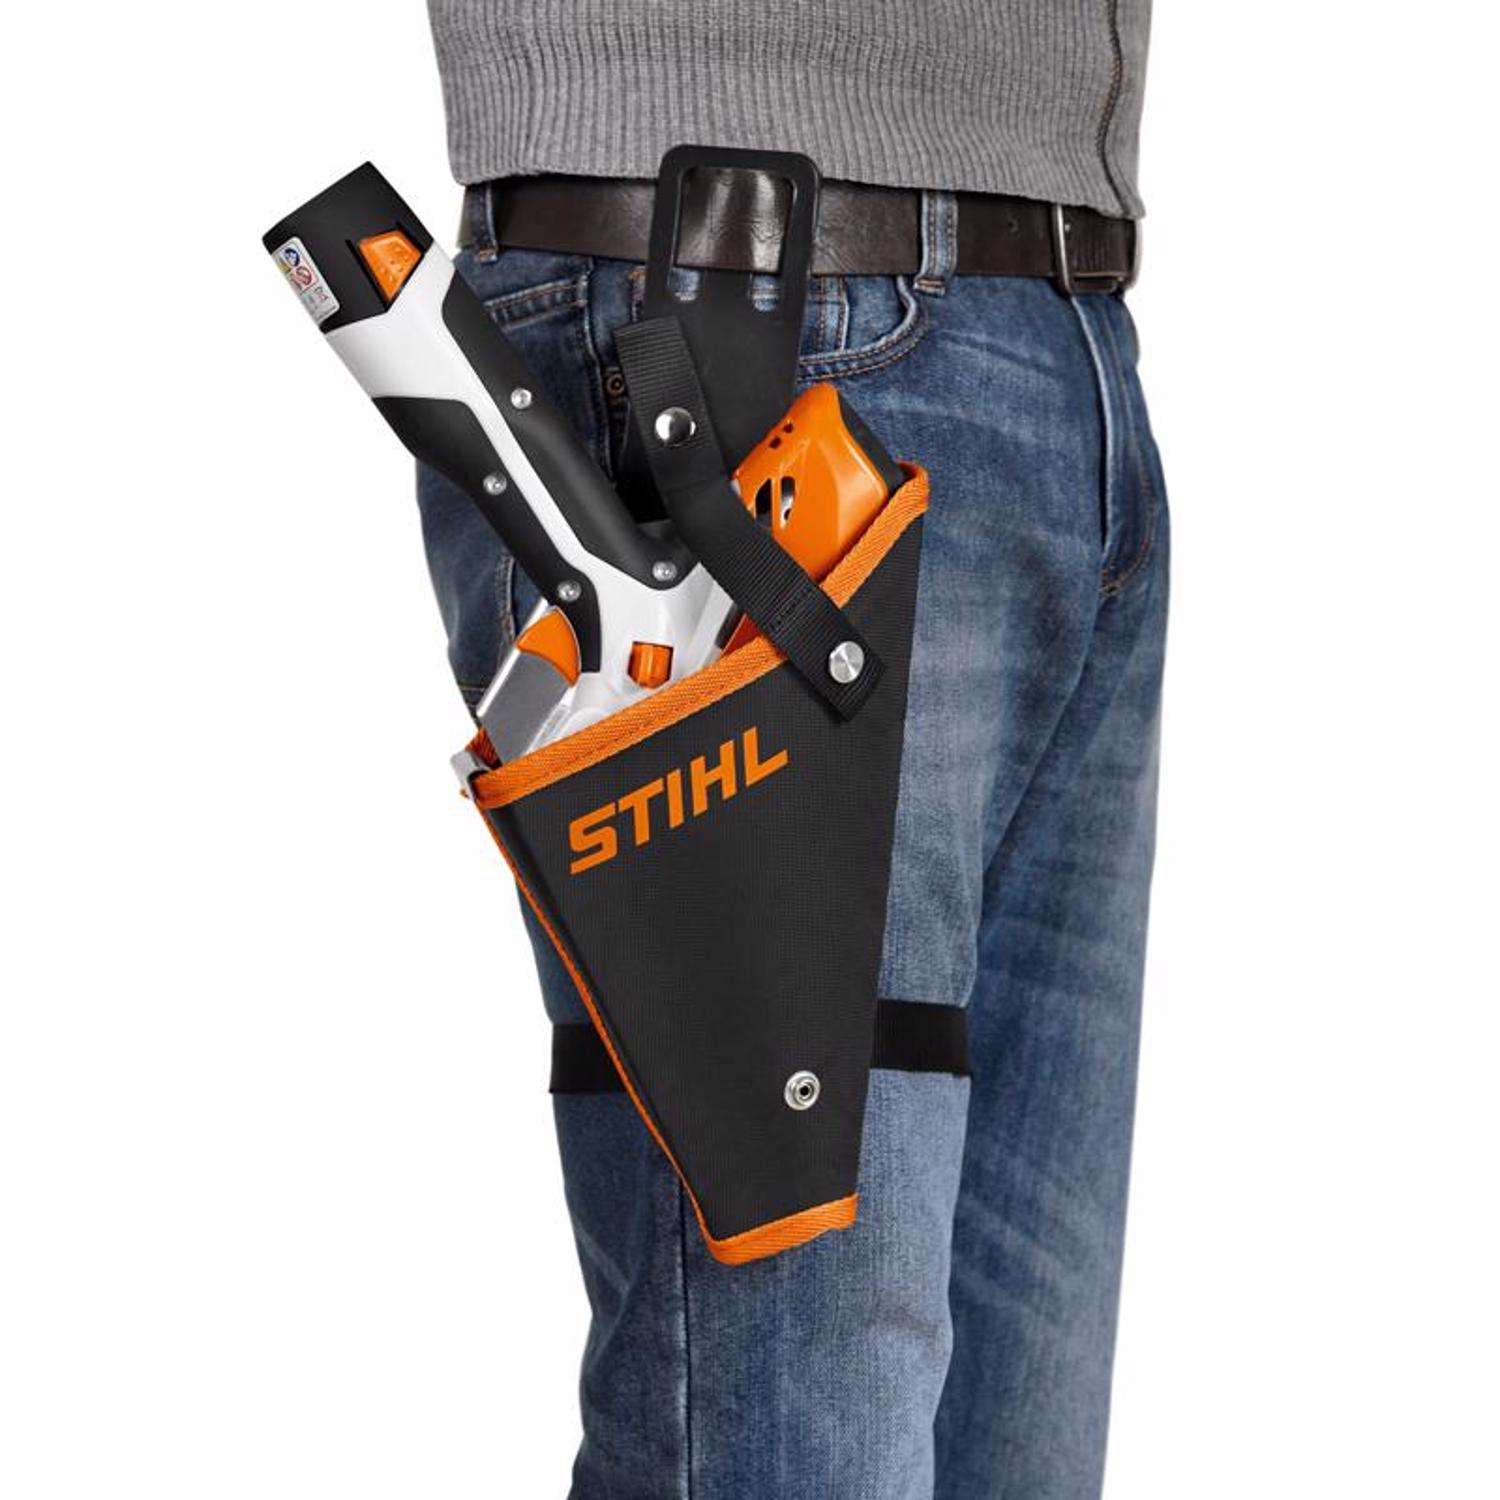 secure back with glazing points - Her Tool Belt